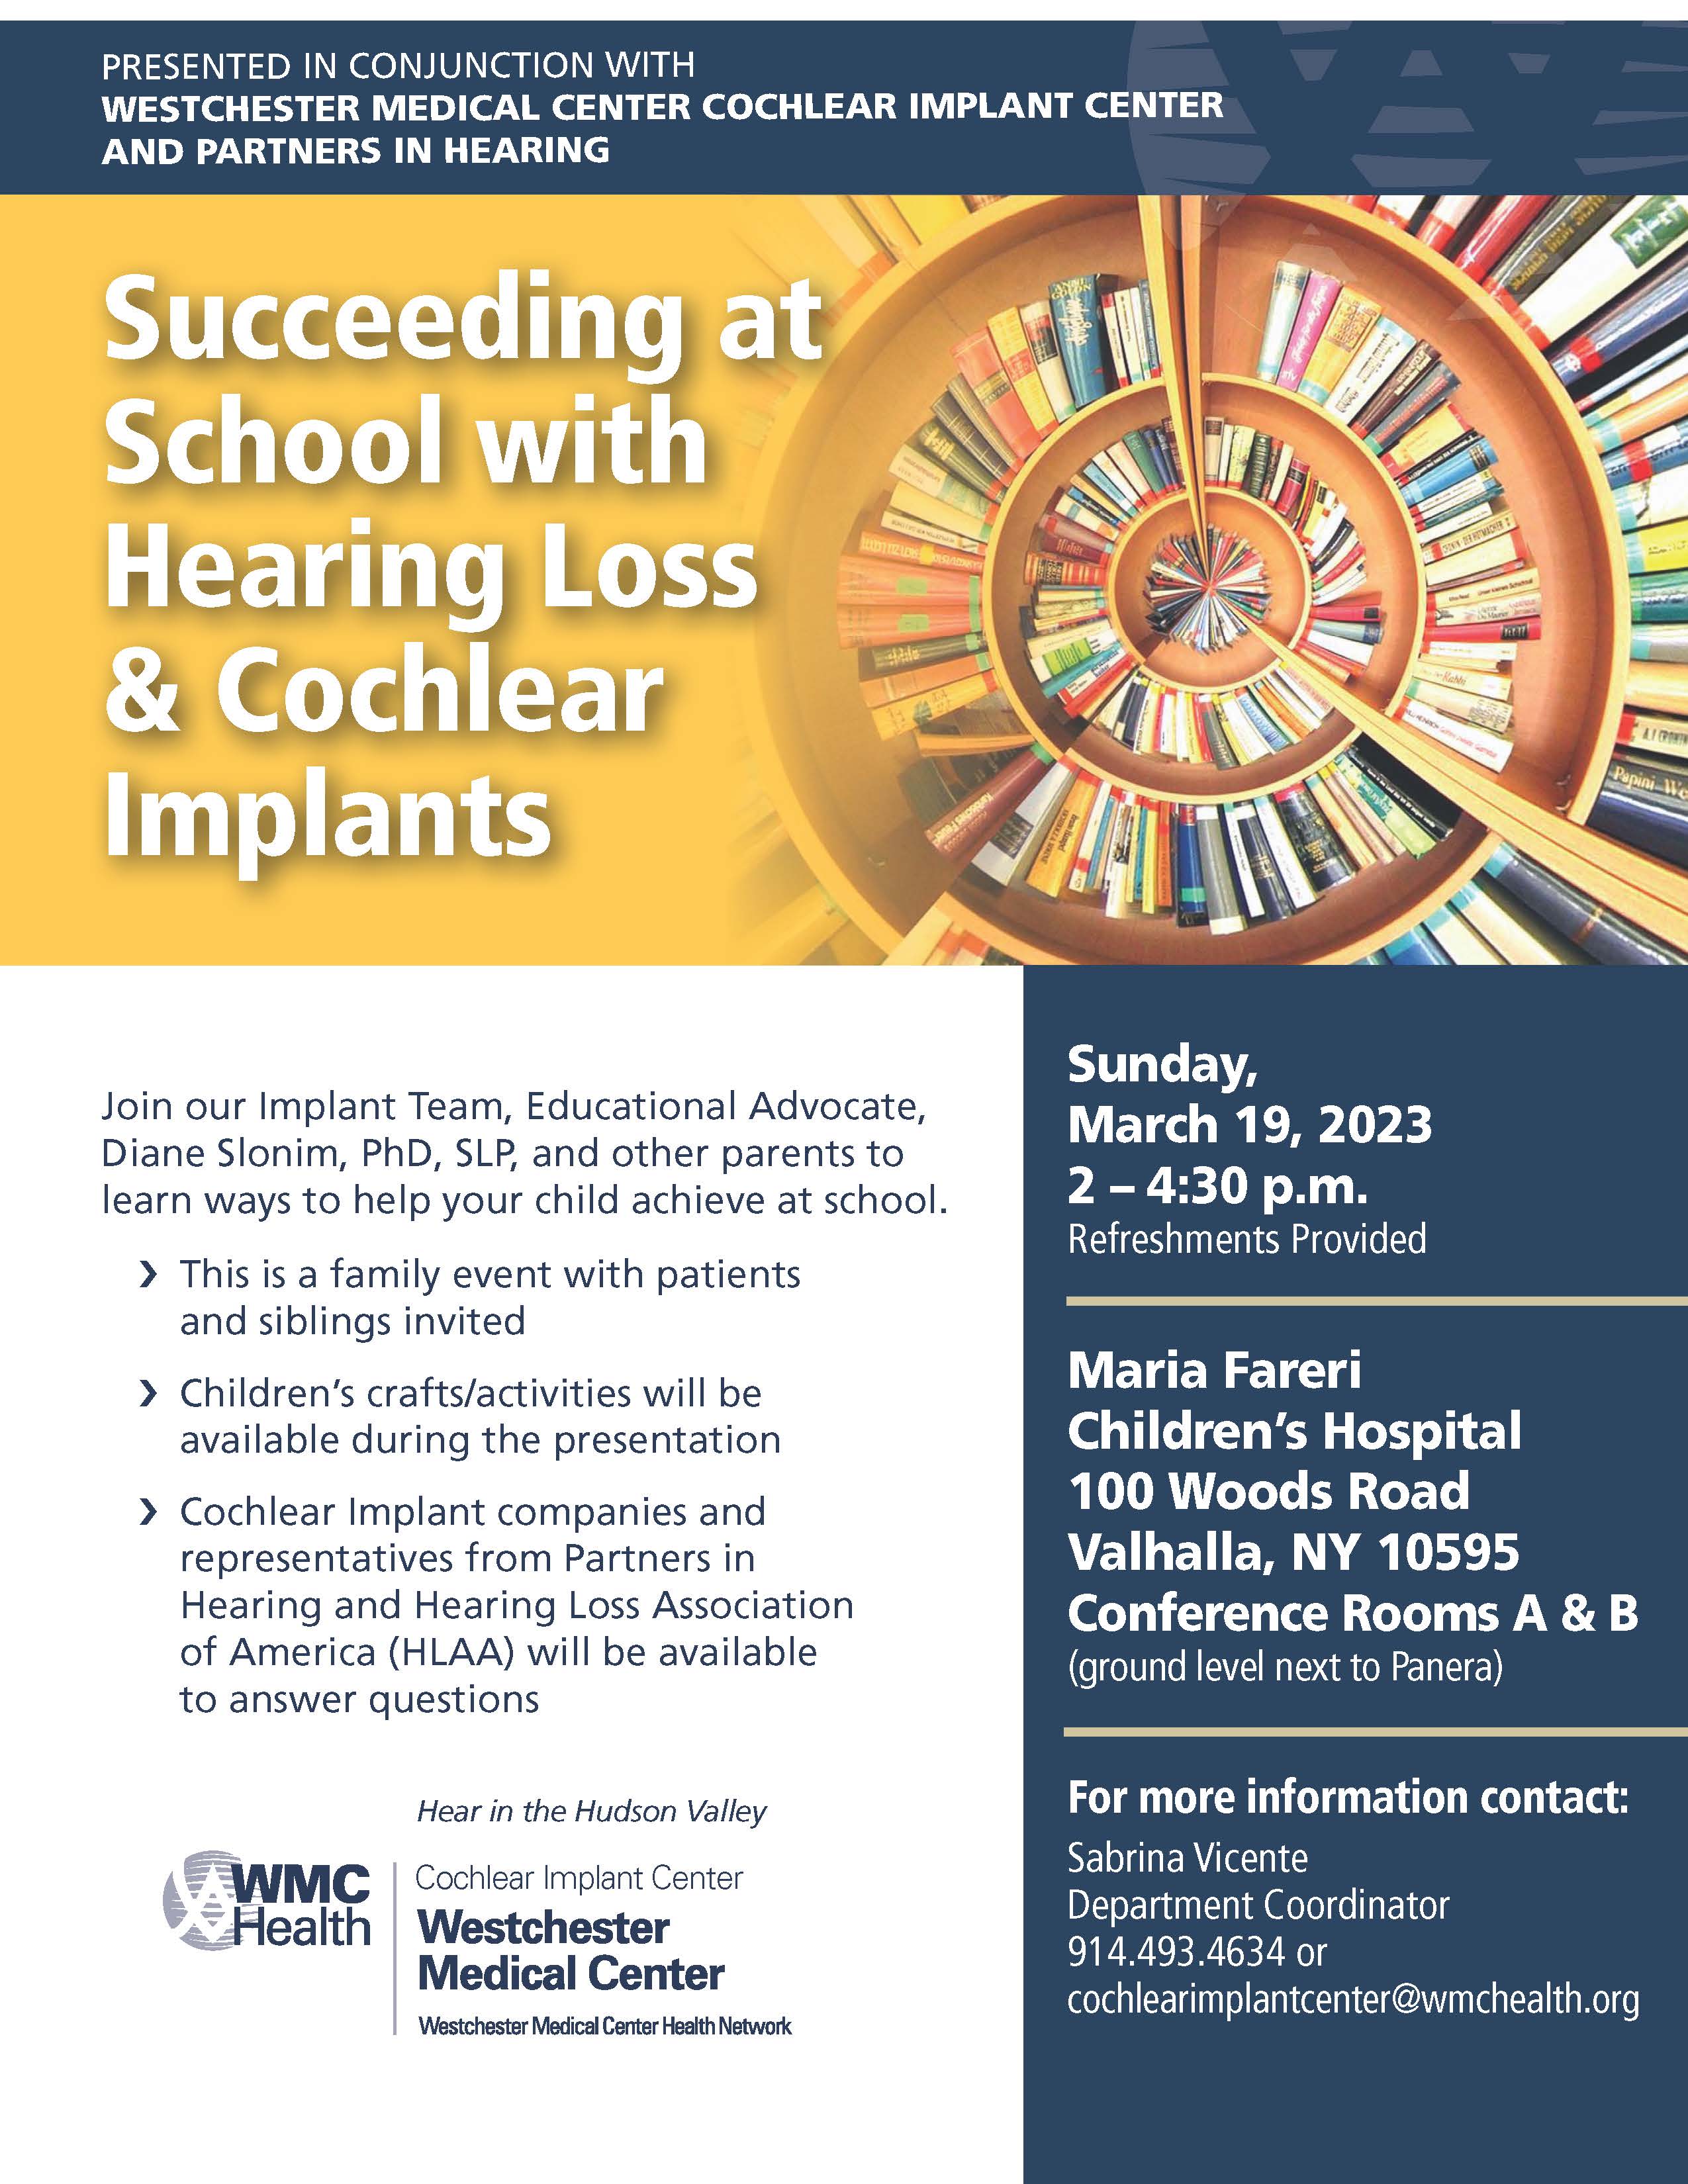 Succeeding at School with Hearing Loss and Cochlear Implants, Sunday March 19, 2 p.m.